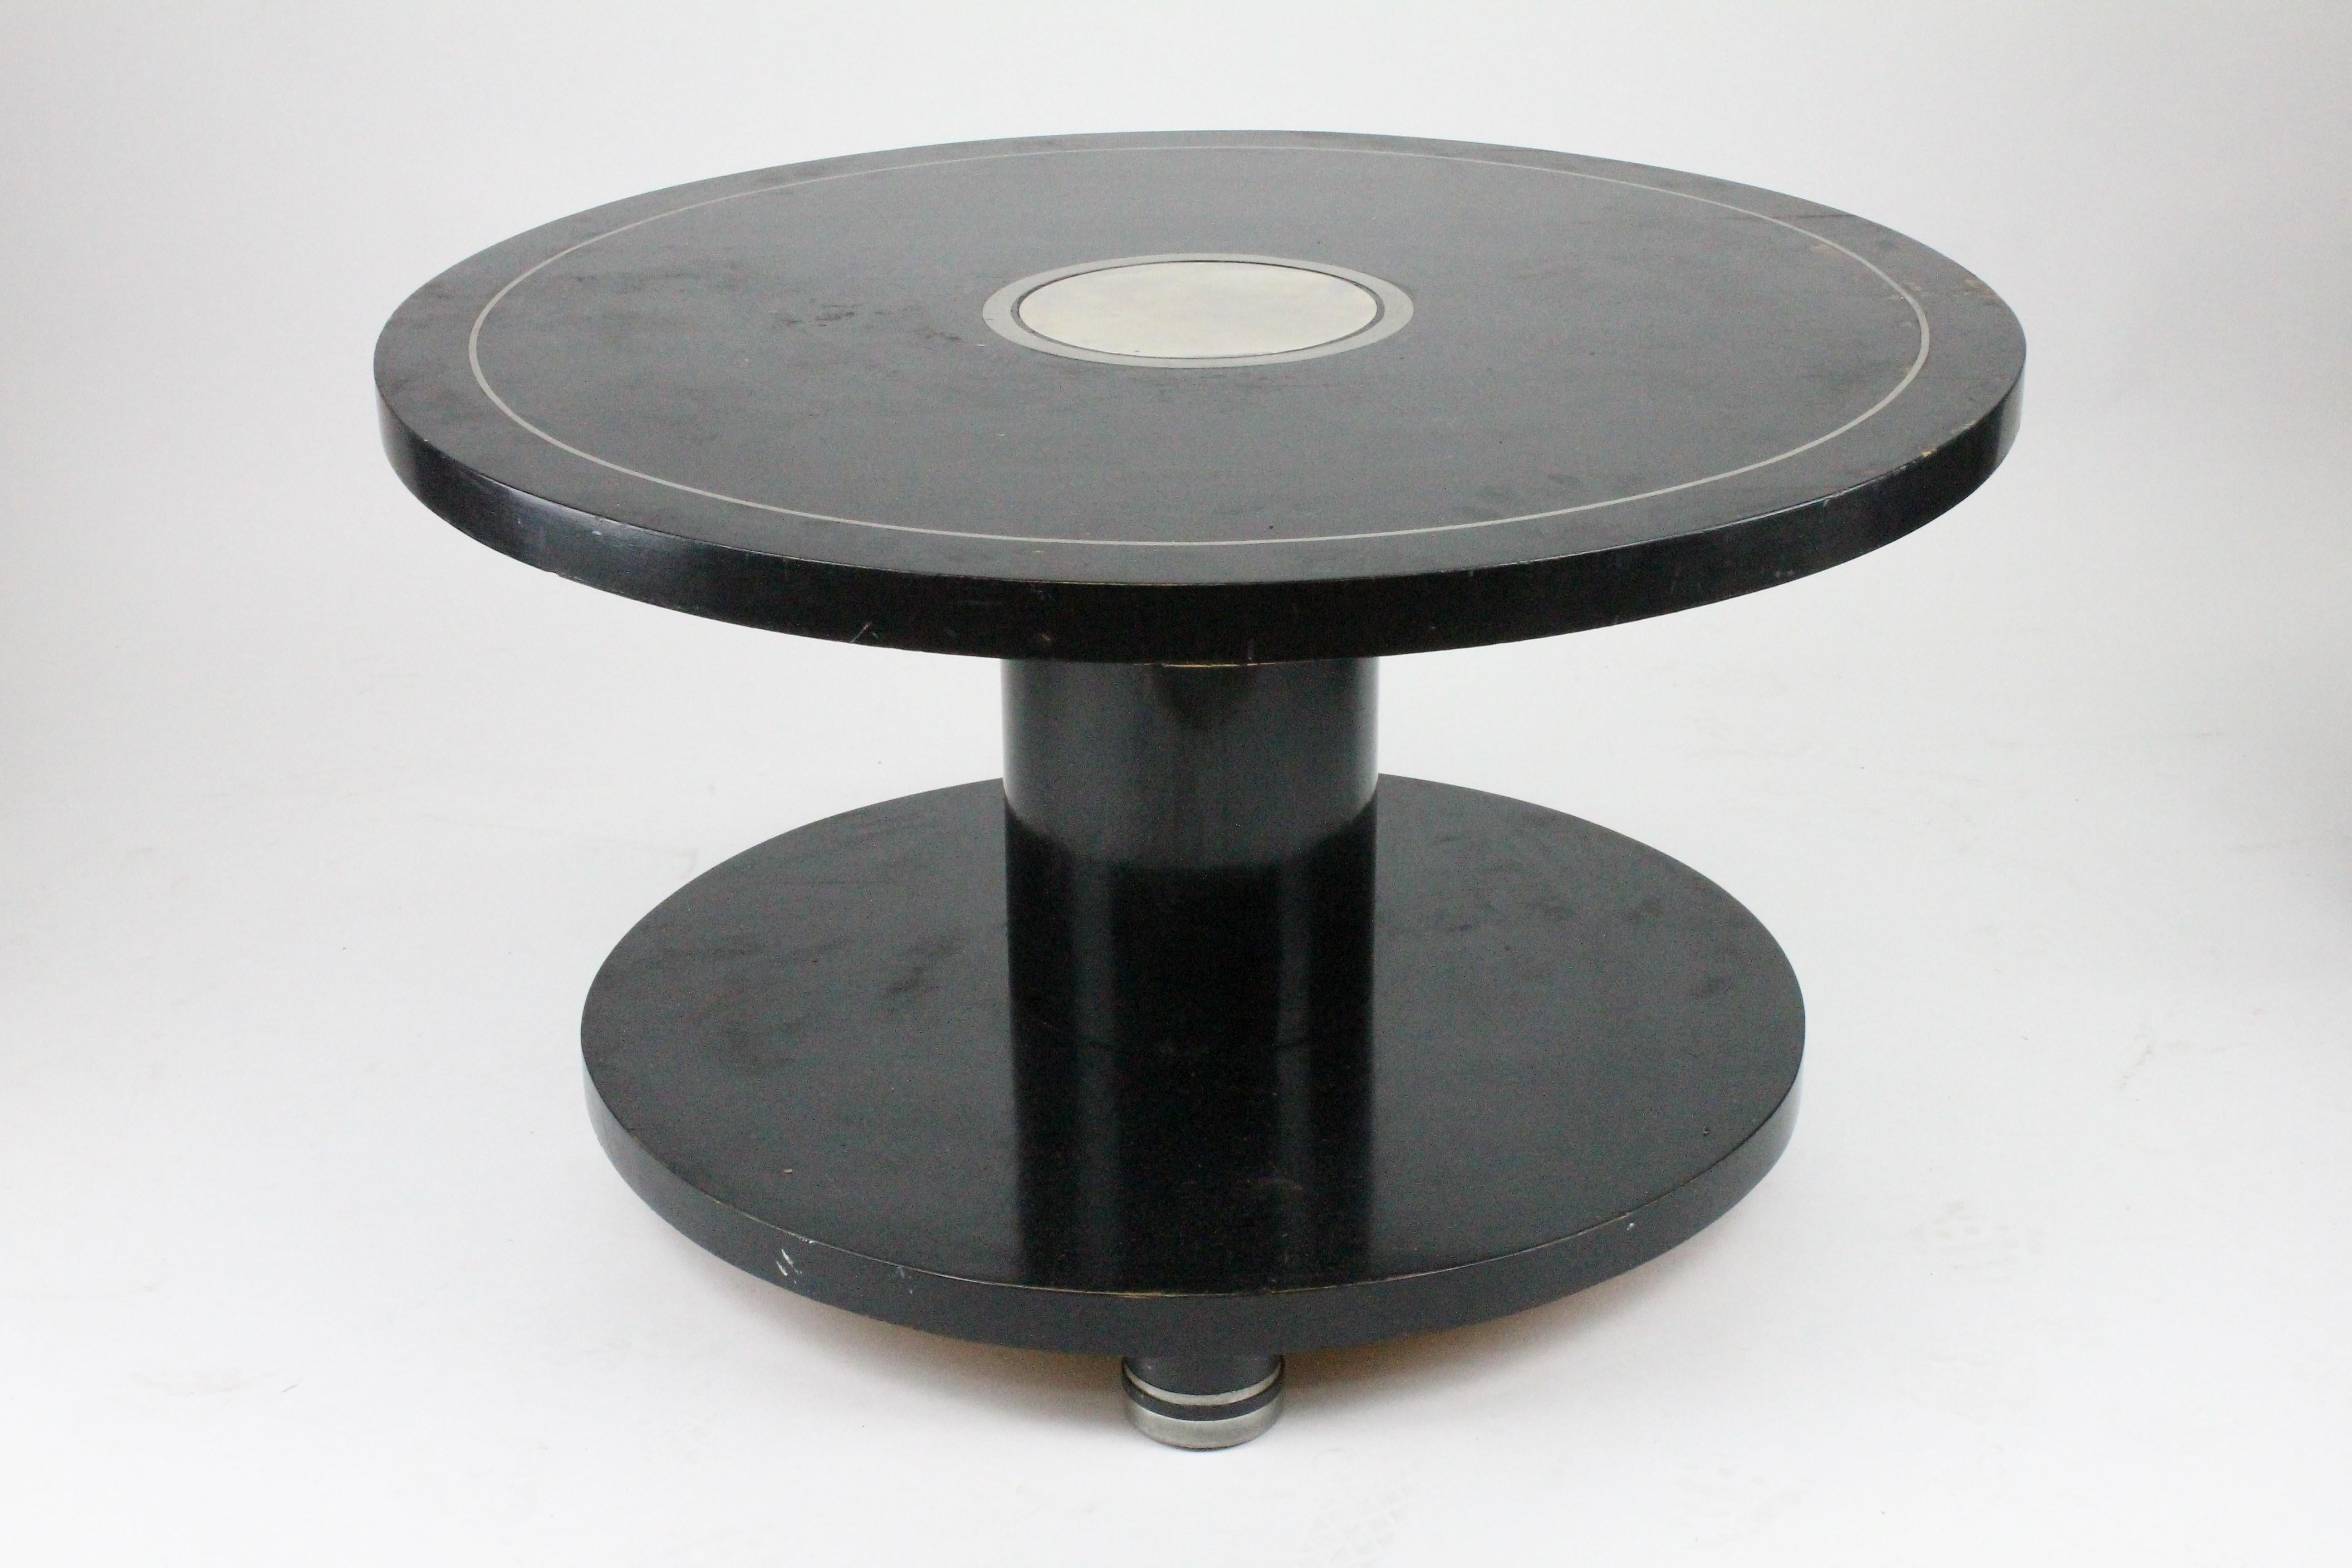 Alvar Andersson Table, 1933, Swedish, Black Painted with Pewter Inlays 7